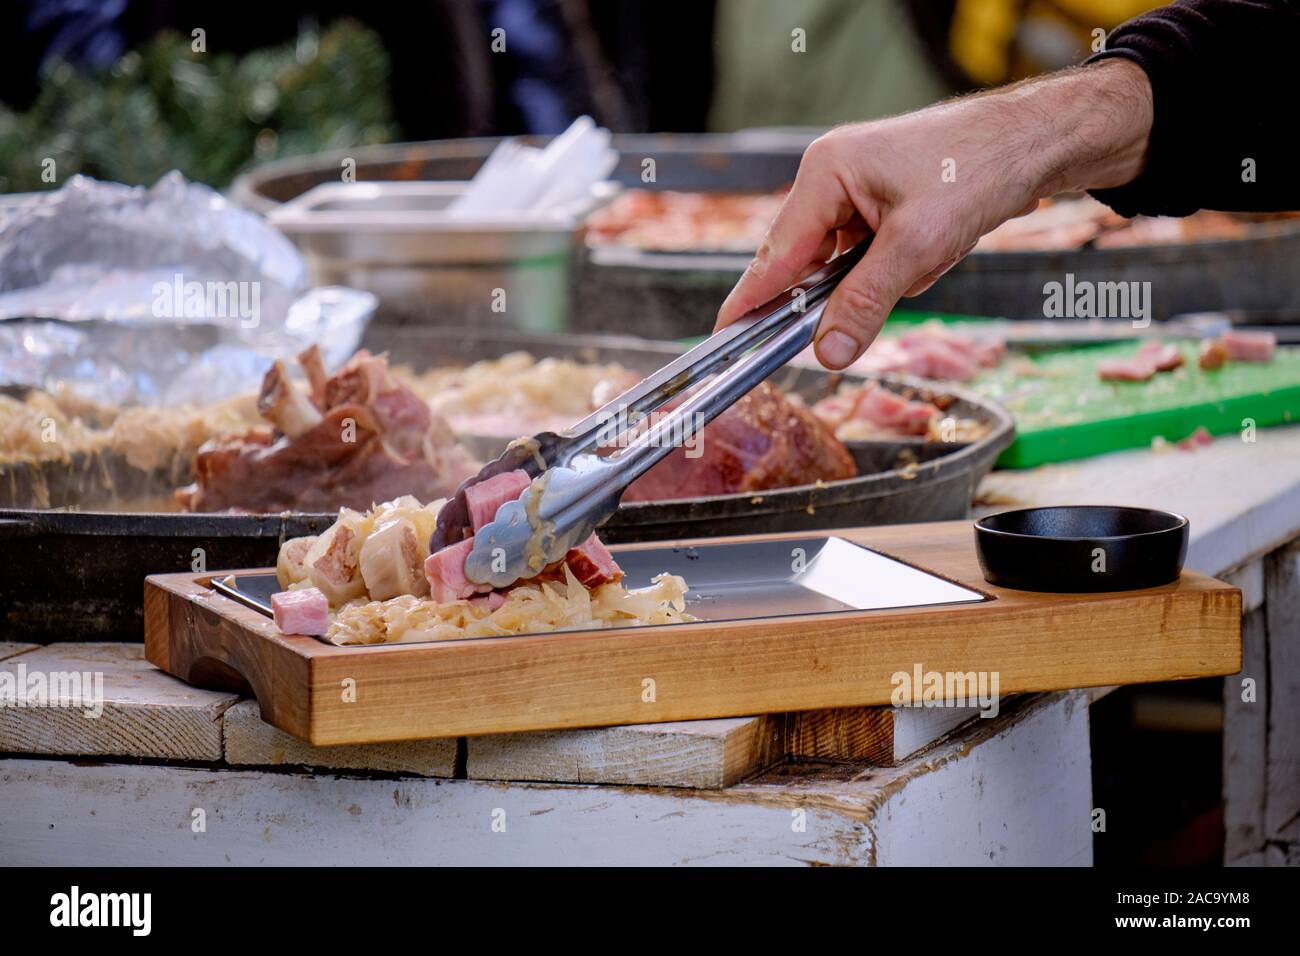 Focus on traditional Croatian Buncek- Pork Hock preparation in large skillet.  Hand of Man with tongs plating pork & cabbage from stewing preparation Stock Photo